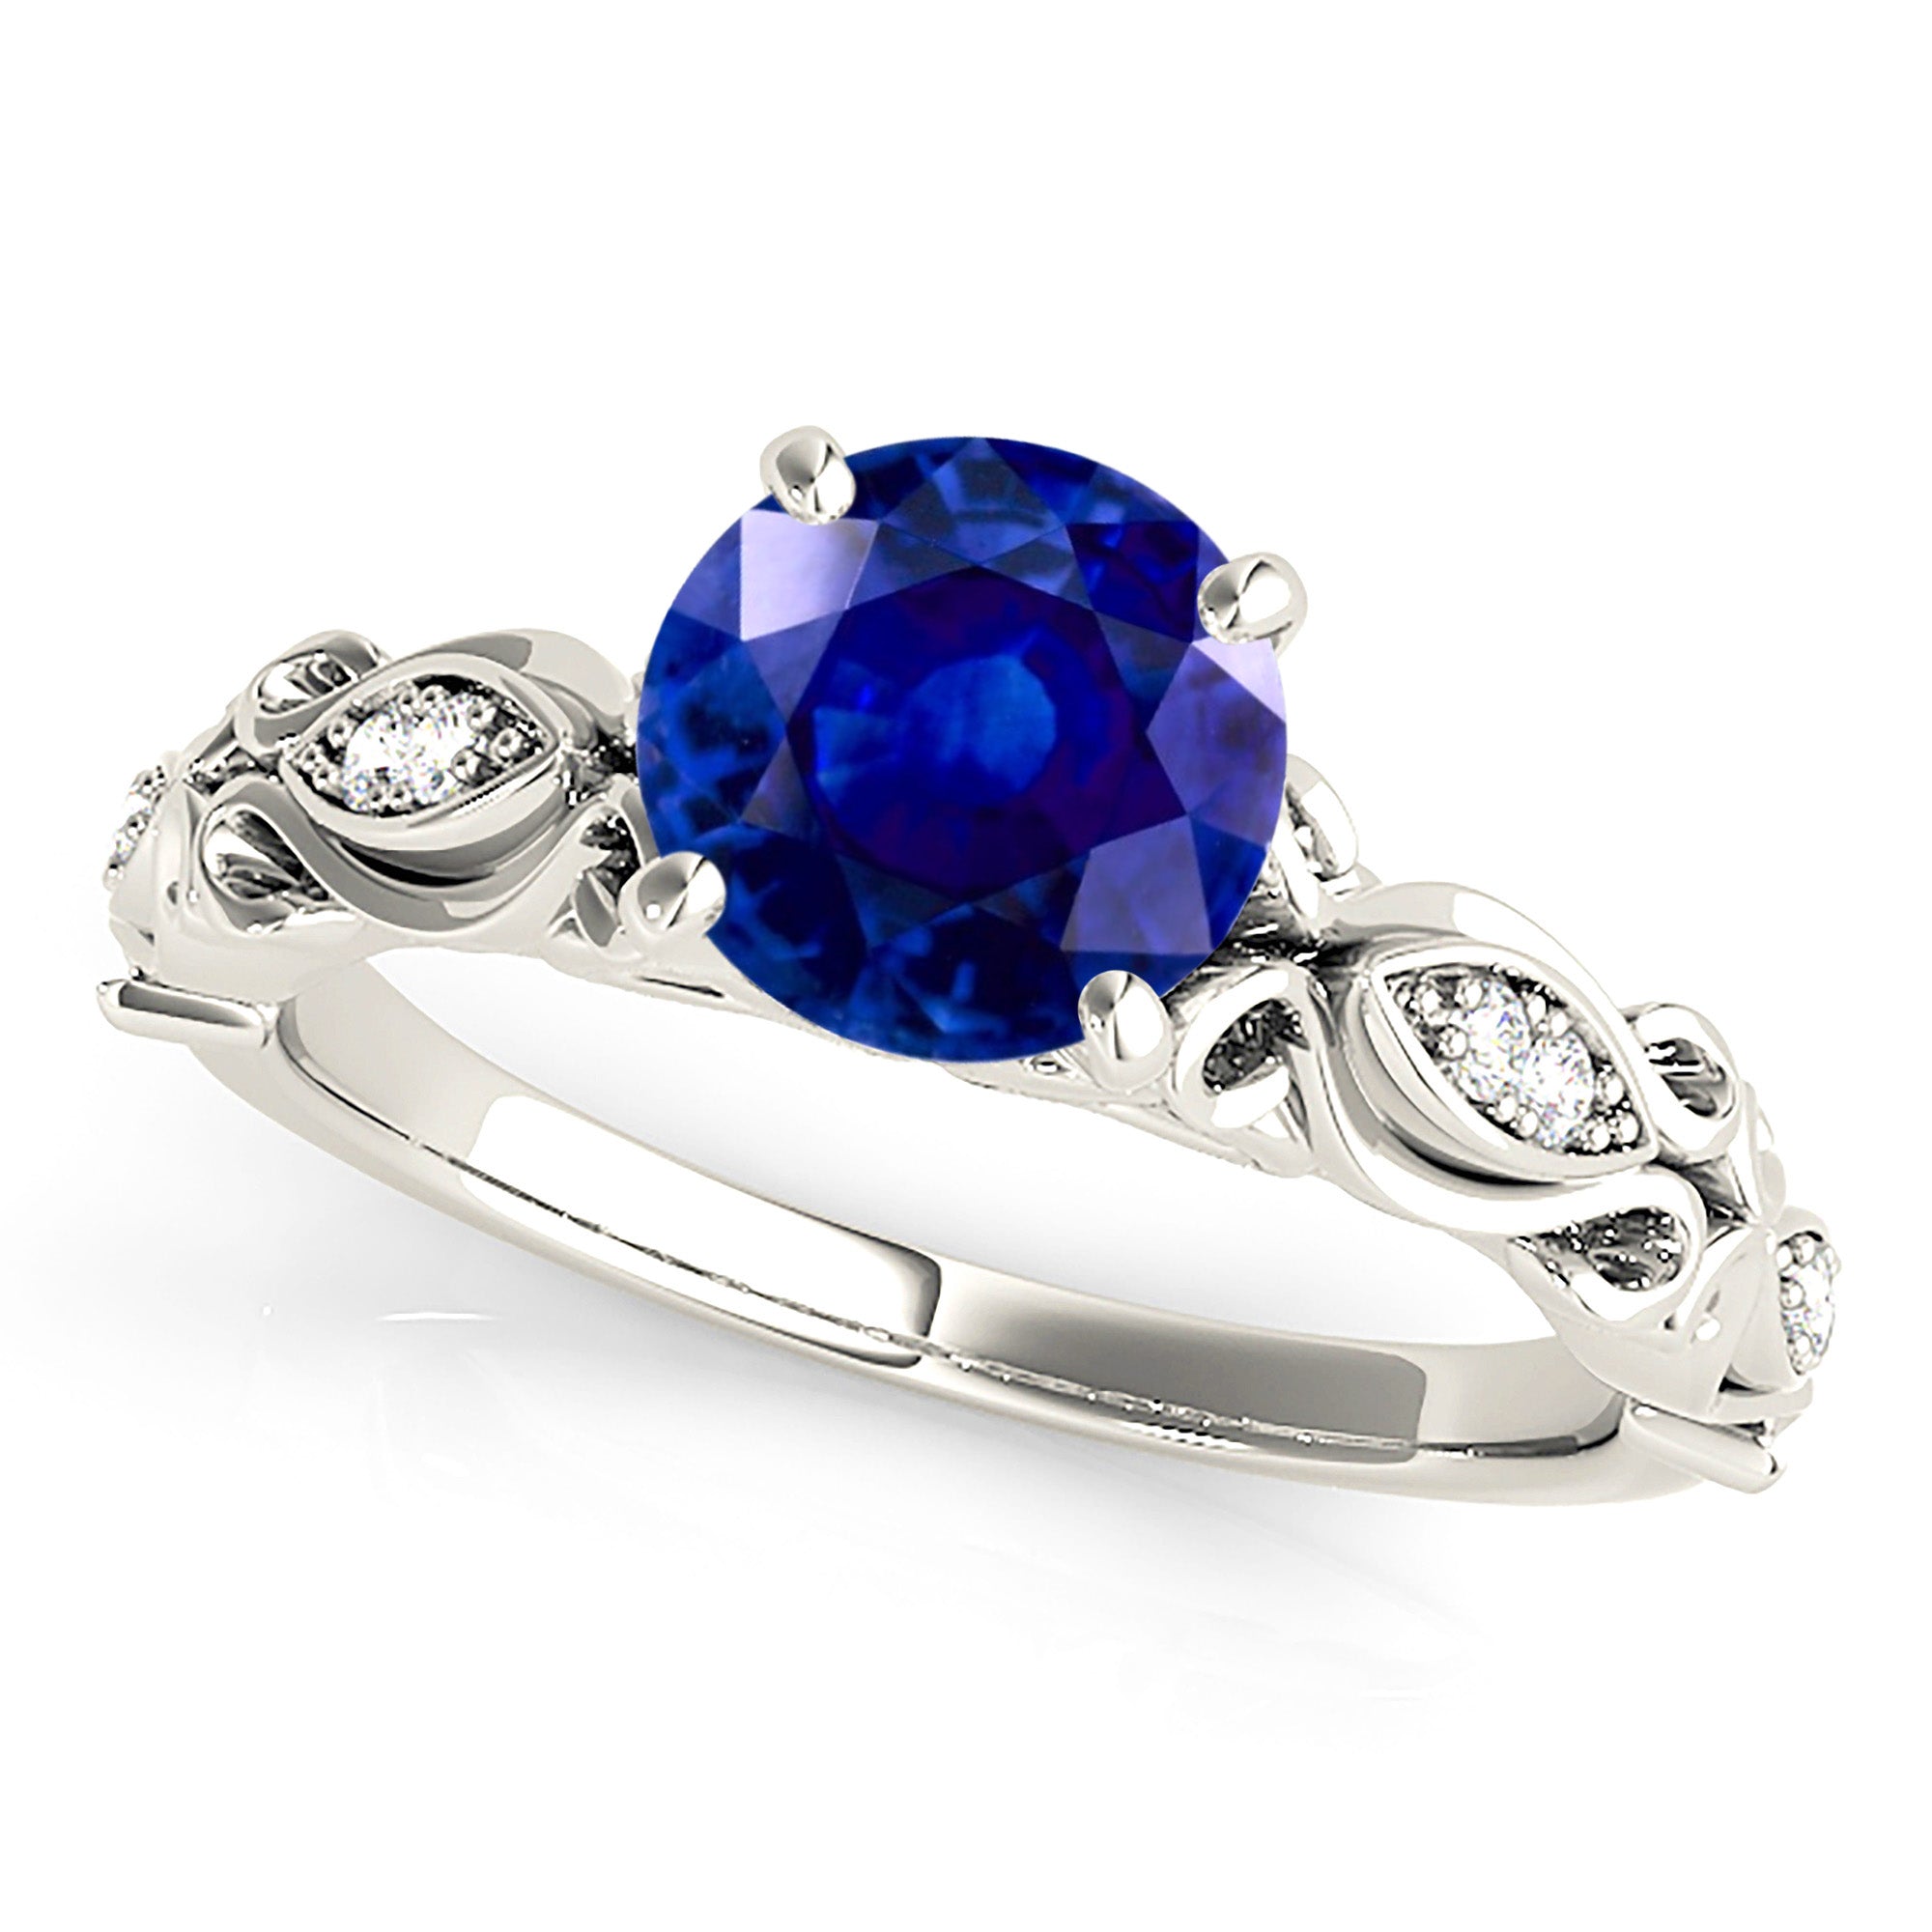 1.80 ct. Genuine Blue Sapphire Vintage Ring With 0.20 ctw. Side Diamonds-in 14K/18K White, Yellow, Rose Gold and Platinum - Christmas Jewelry Gift -VIRABYANI